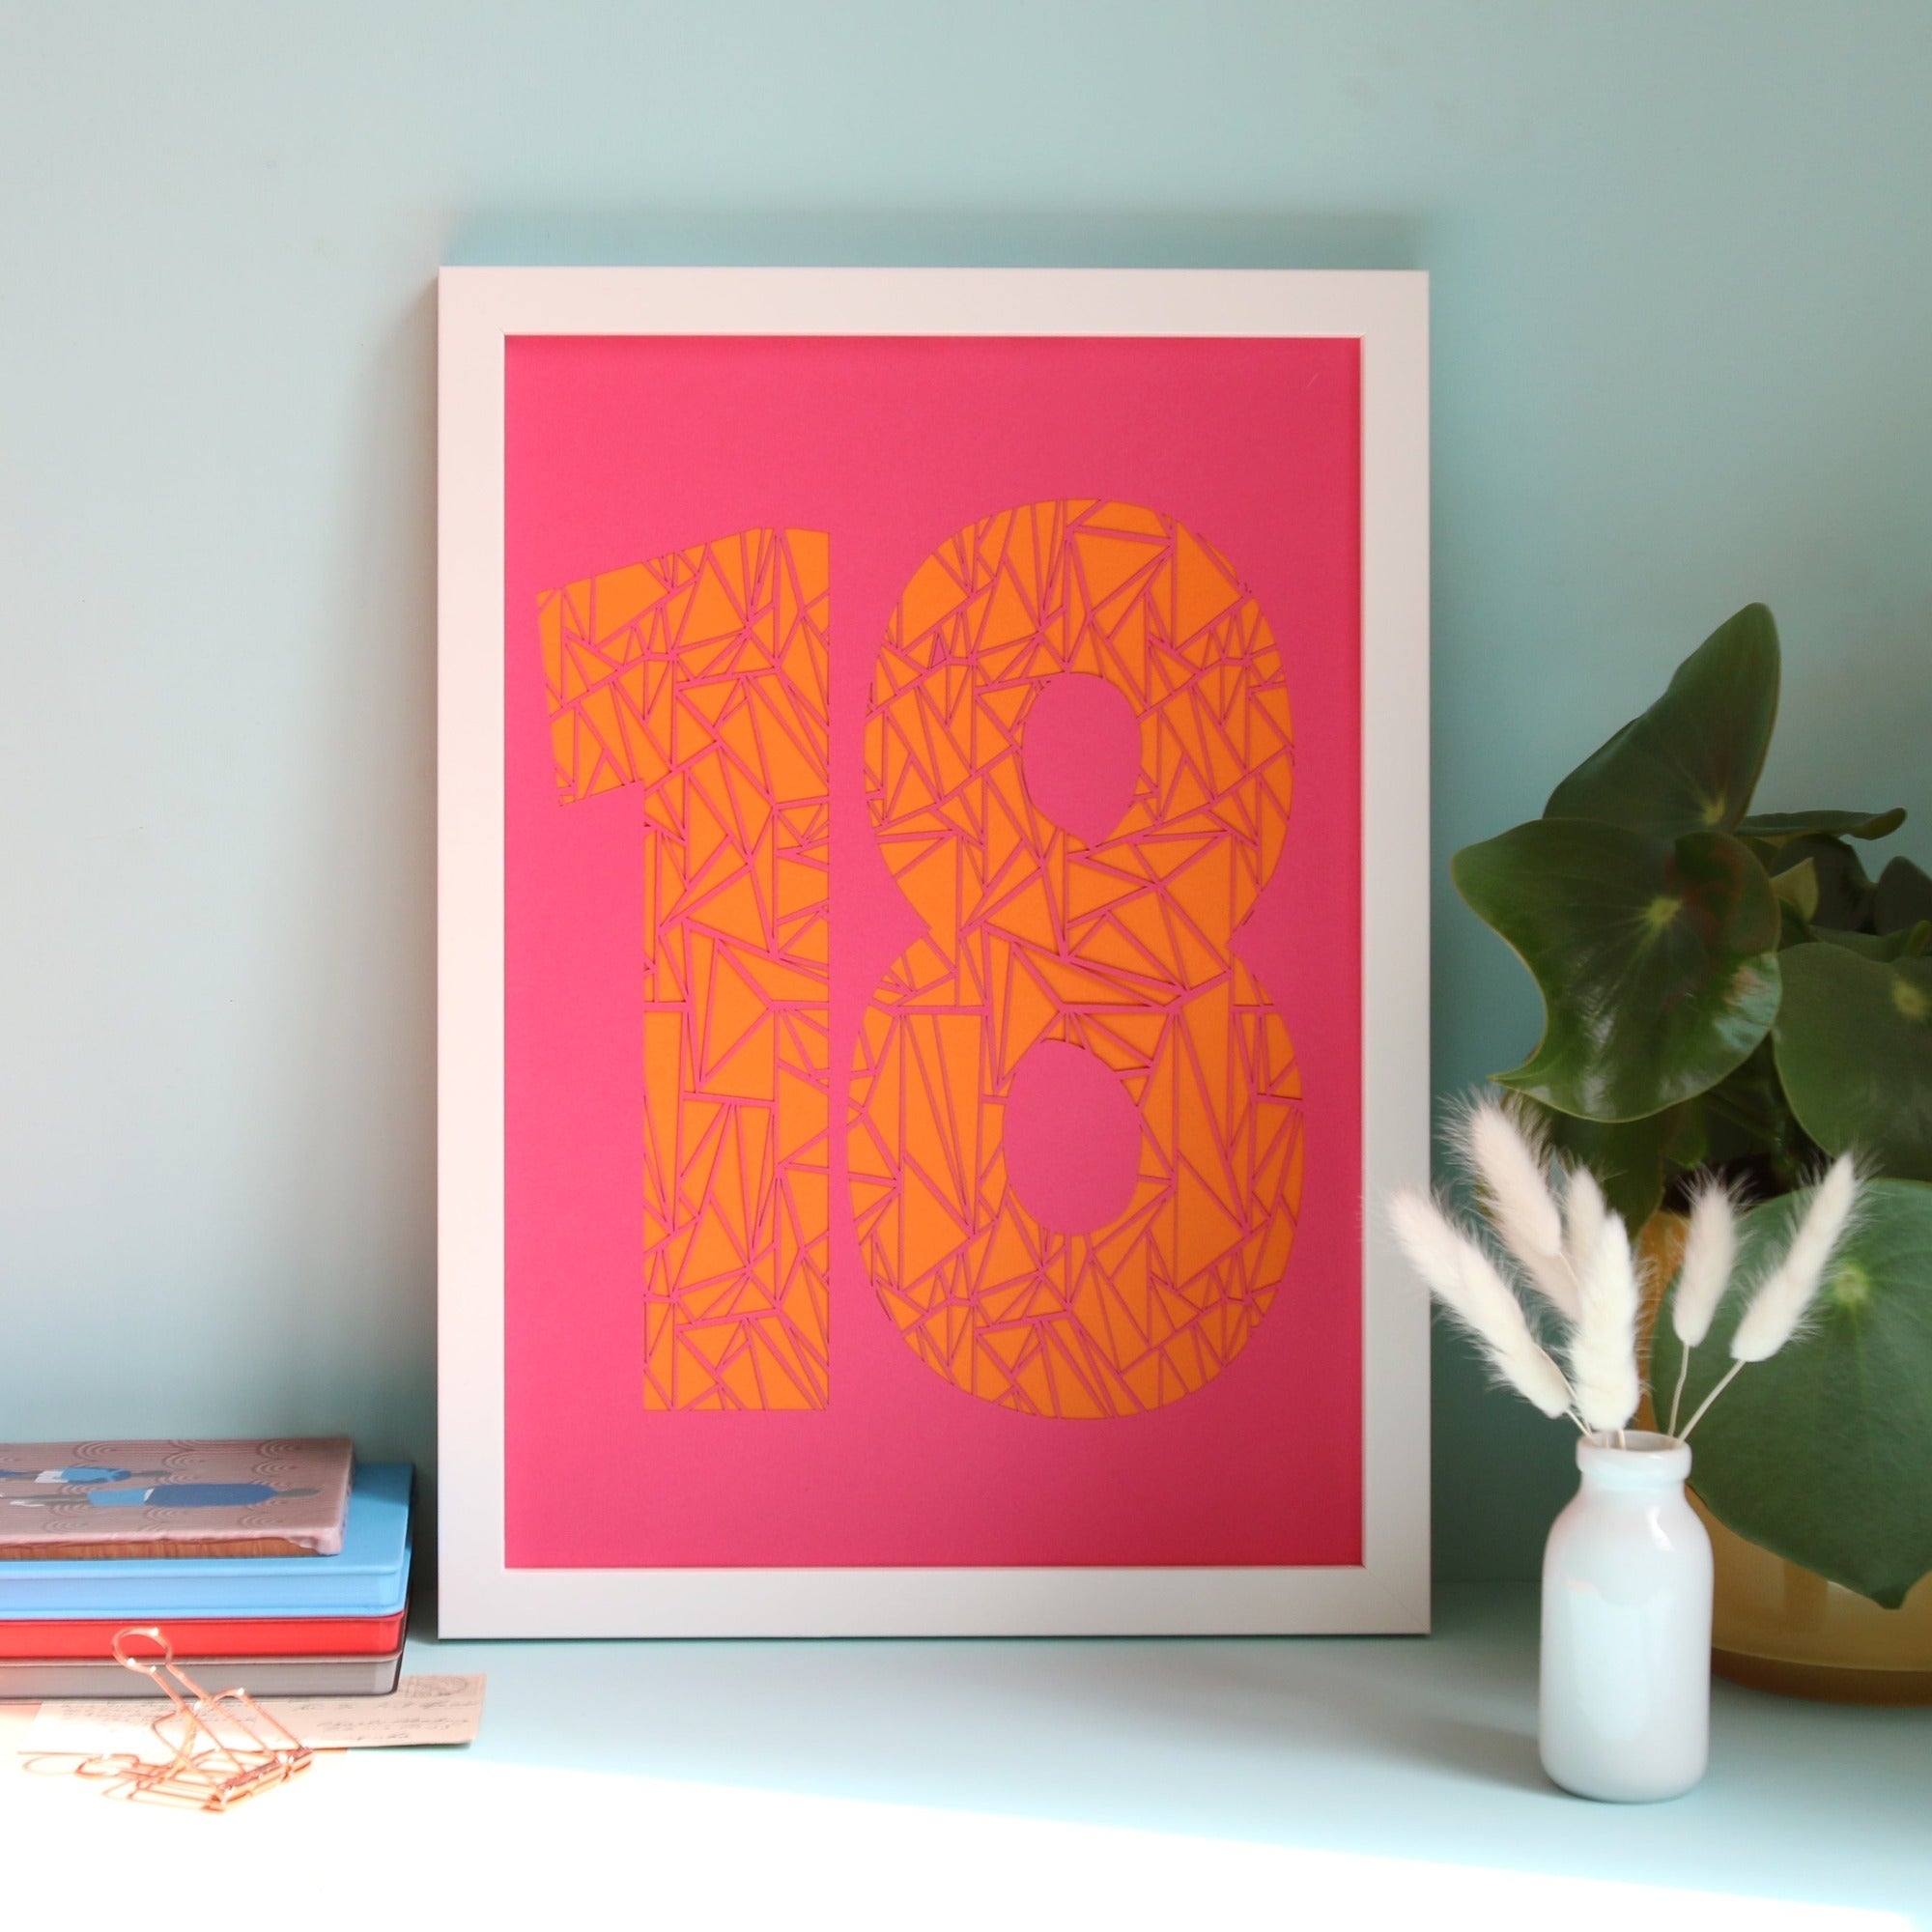 Bright pink papercut of the number 18 with a orange background